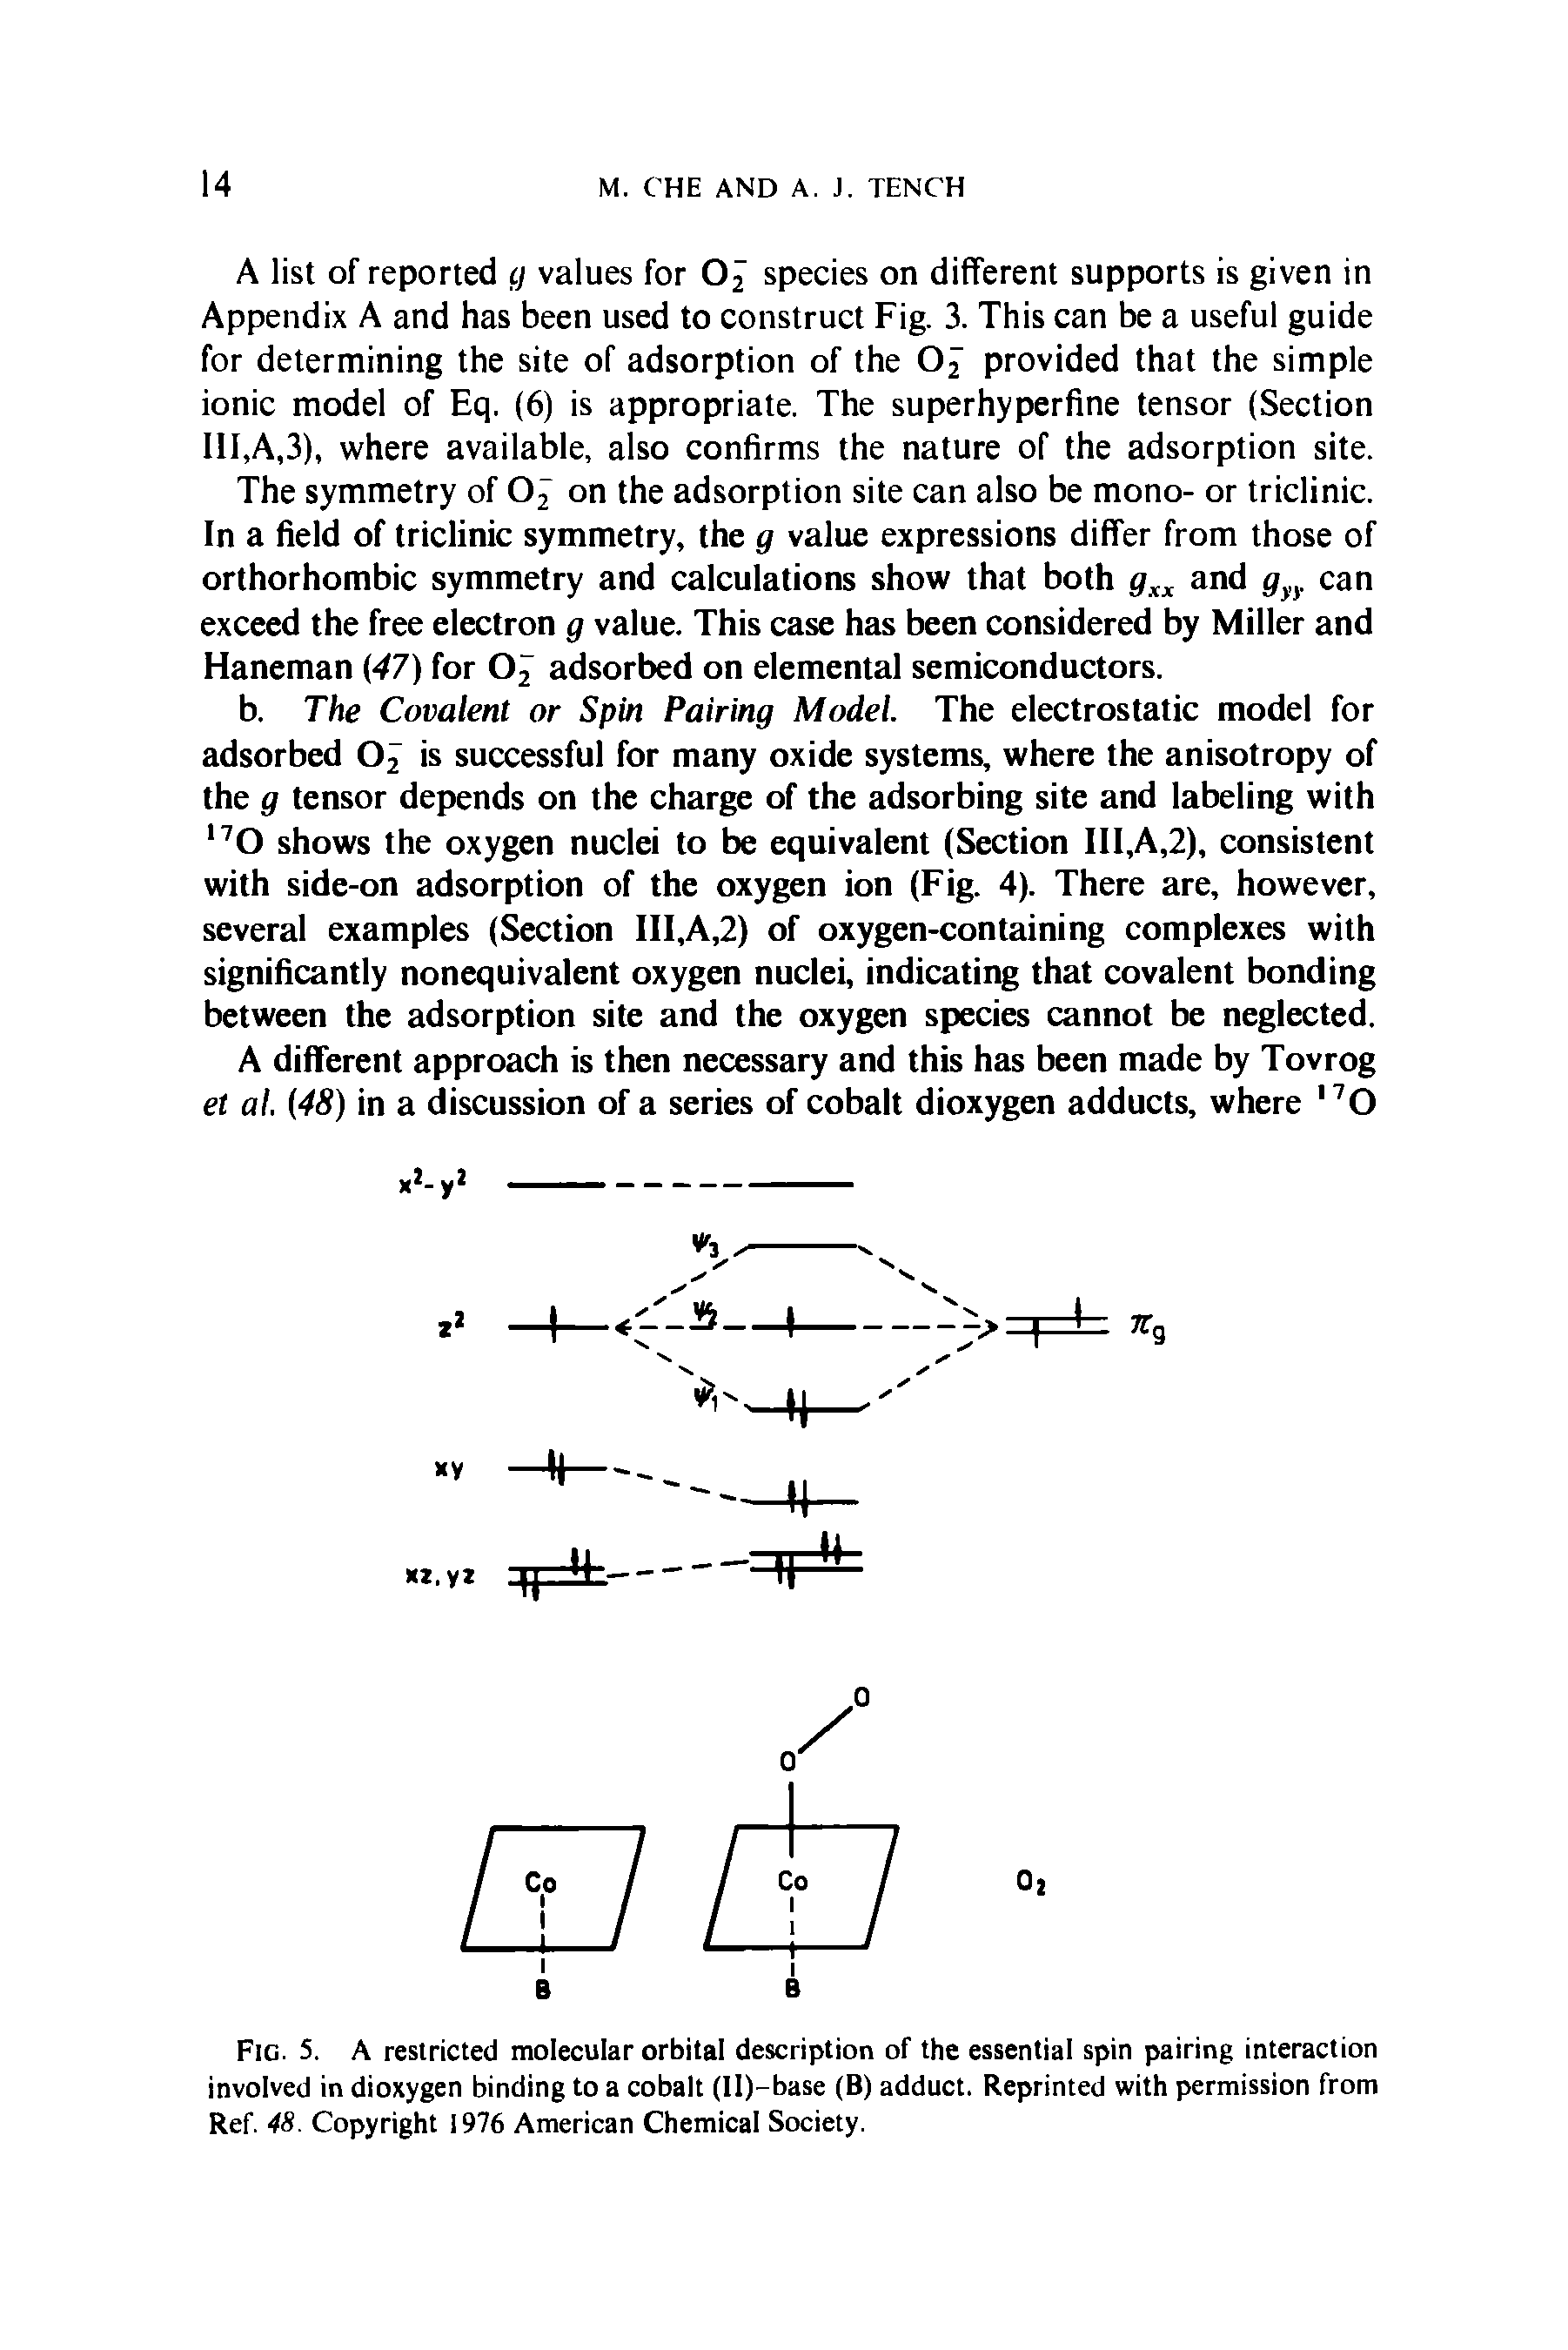 Fig. 5. A restricted molecular orbital description of the essential spin pairing interaction involved in dioxygen binding to a cobalt (Il)-base (B) adduct. Reprinted with permission from Ref. 48. Copyright 1976 American Chemical Society.